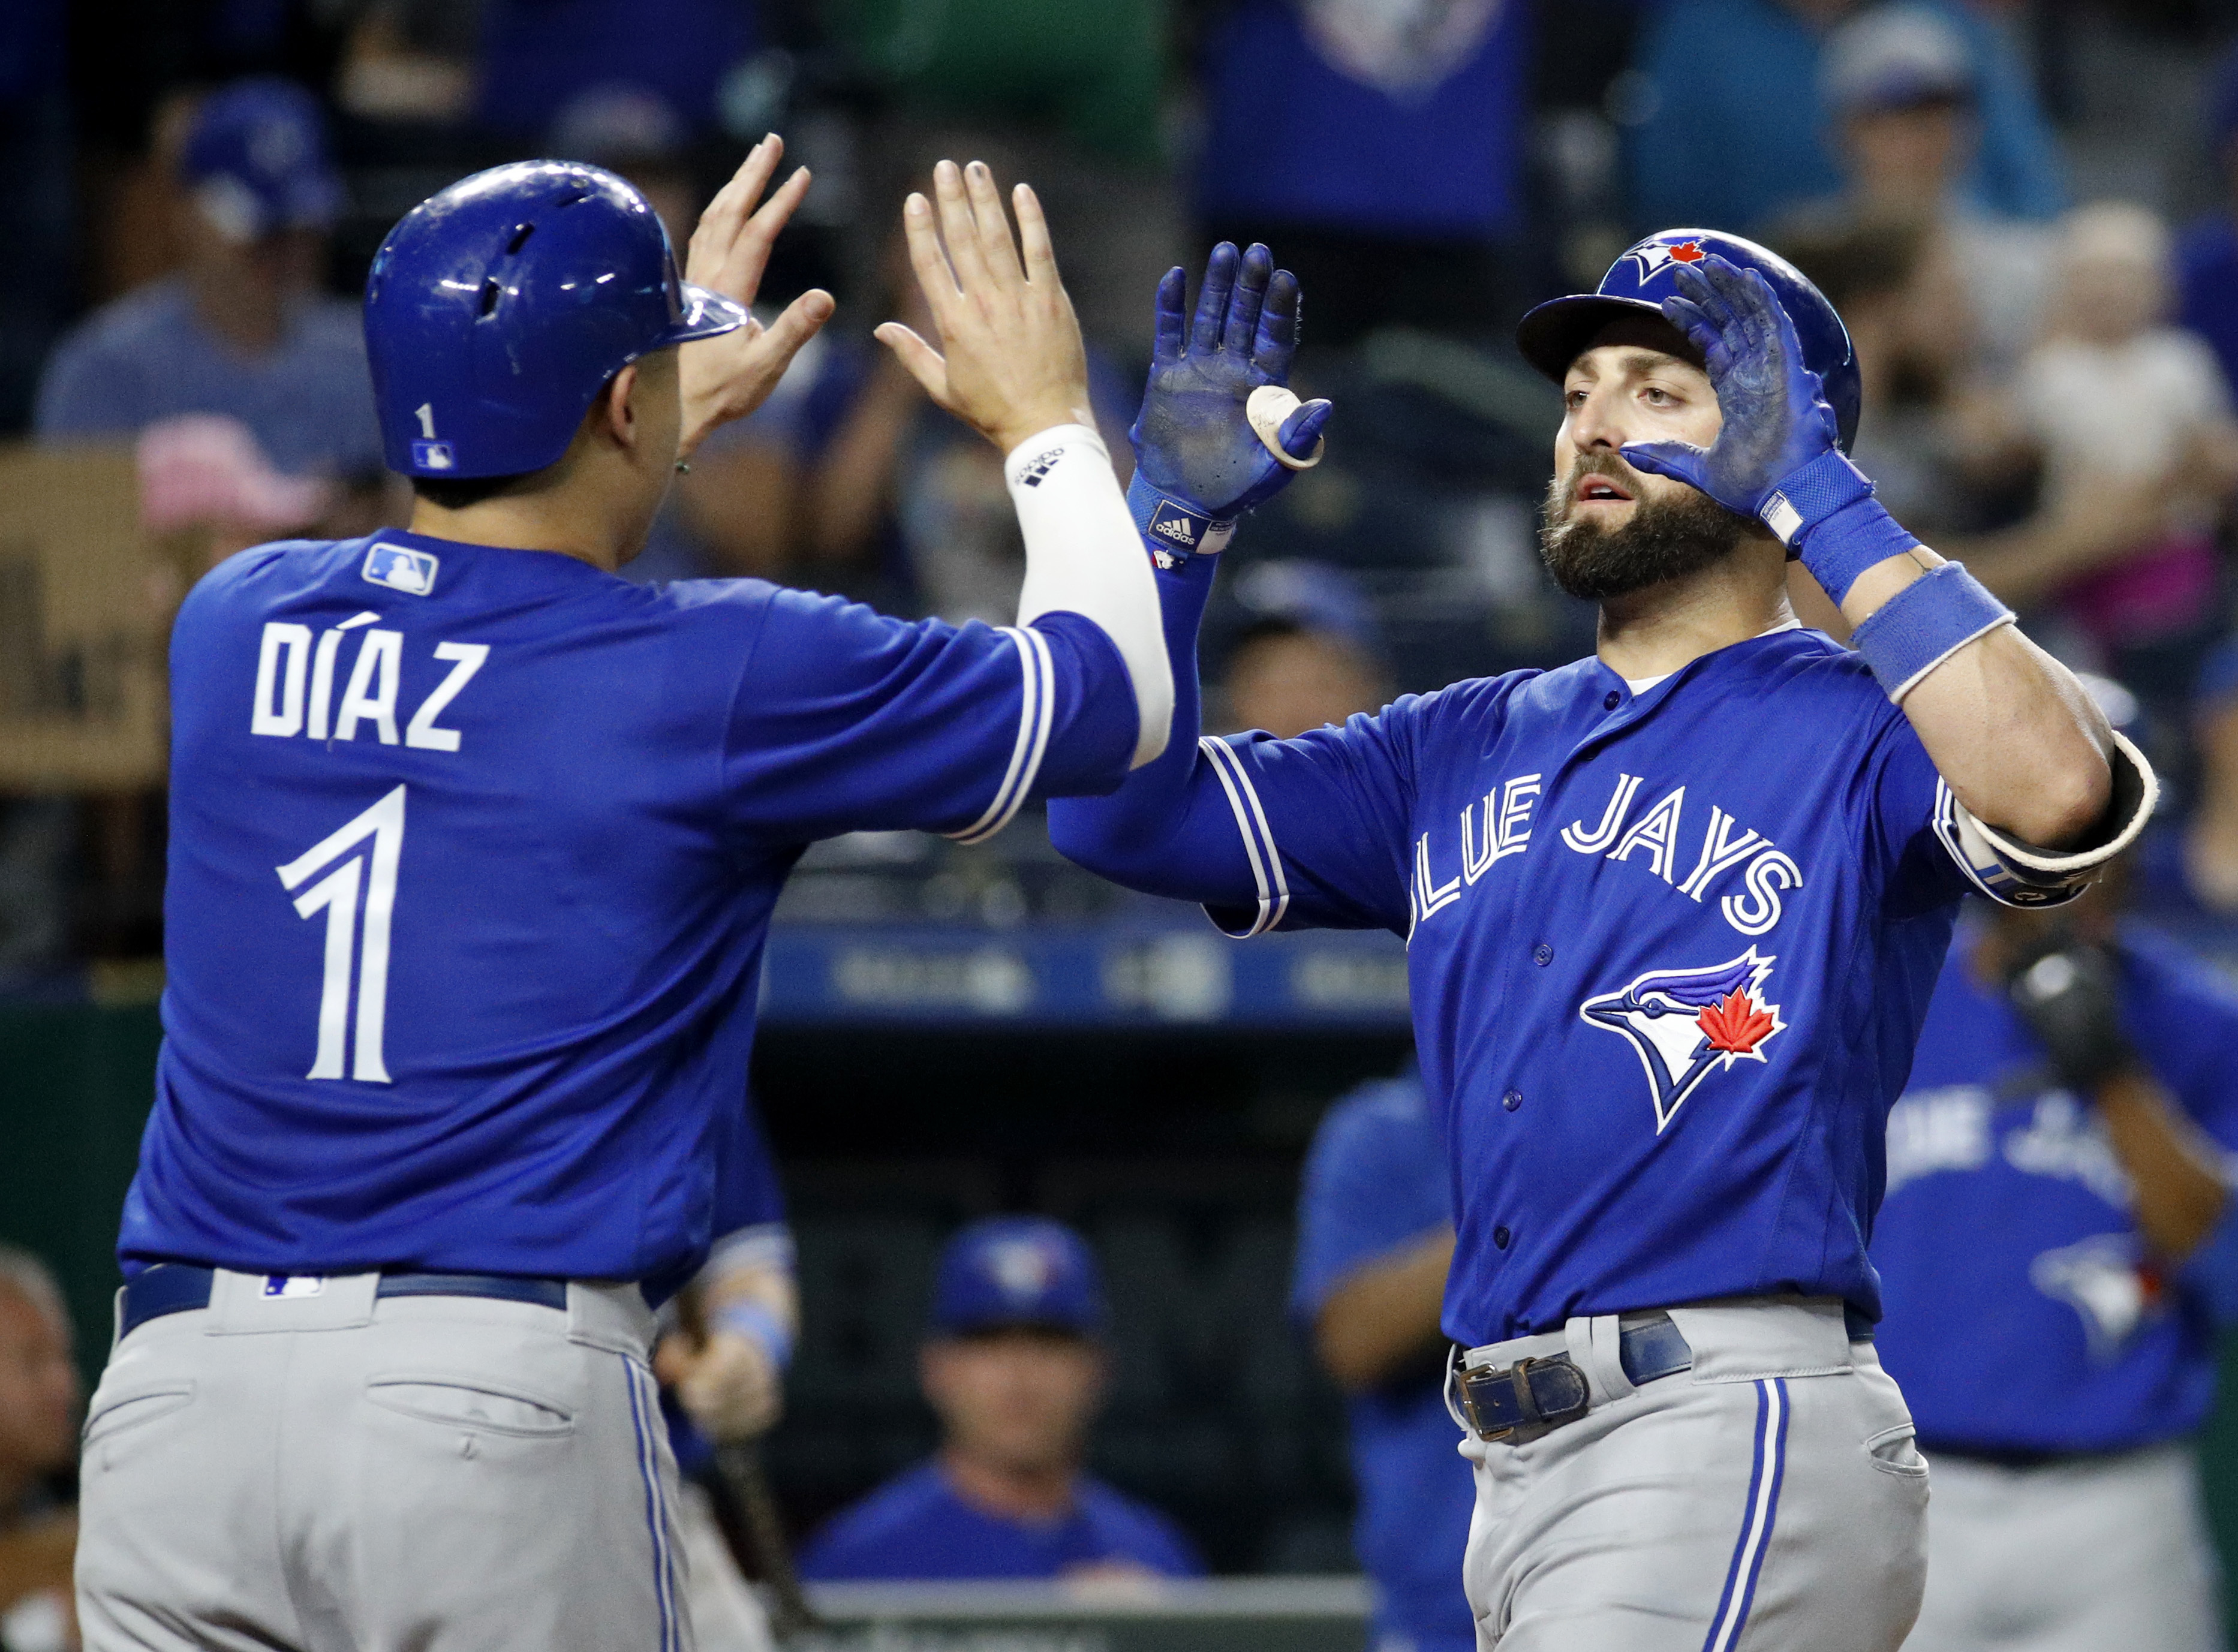 Pillar homers in 8th to lift Blue Jays over Royals 6-5